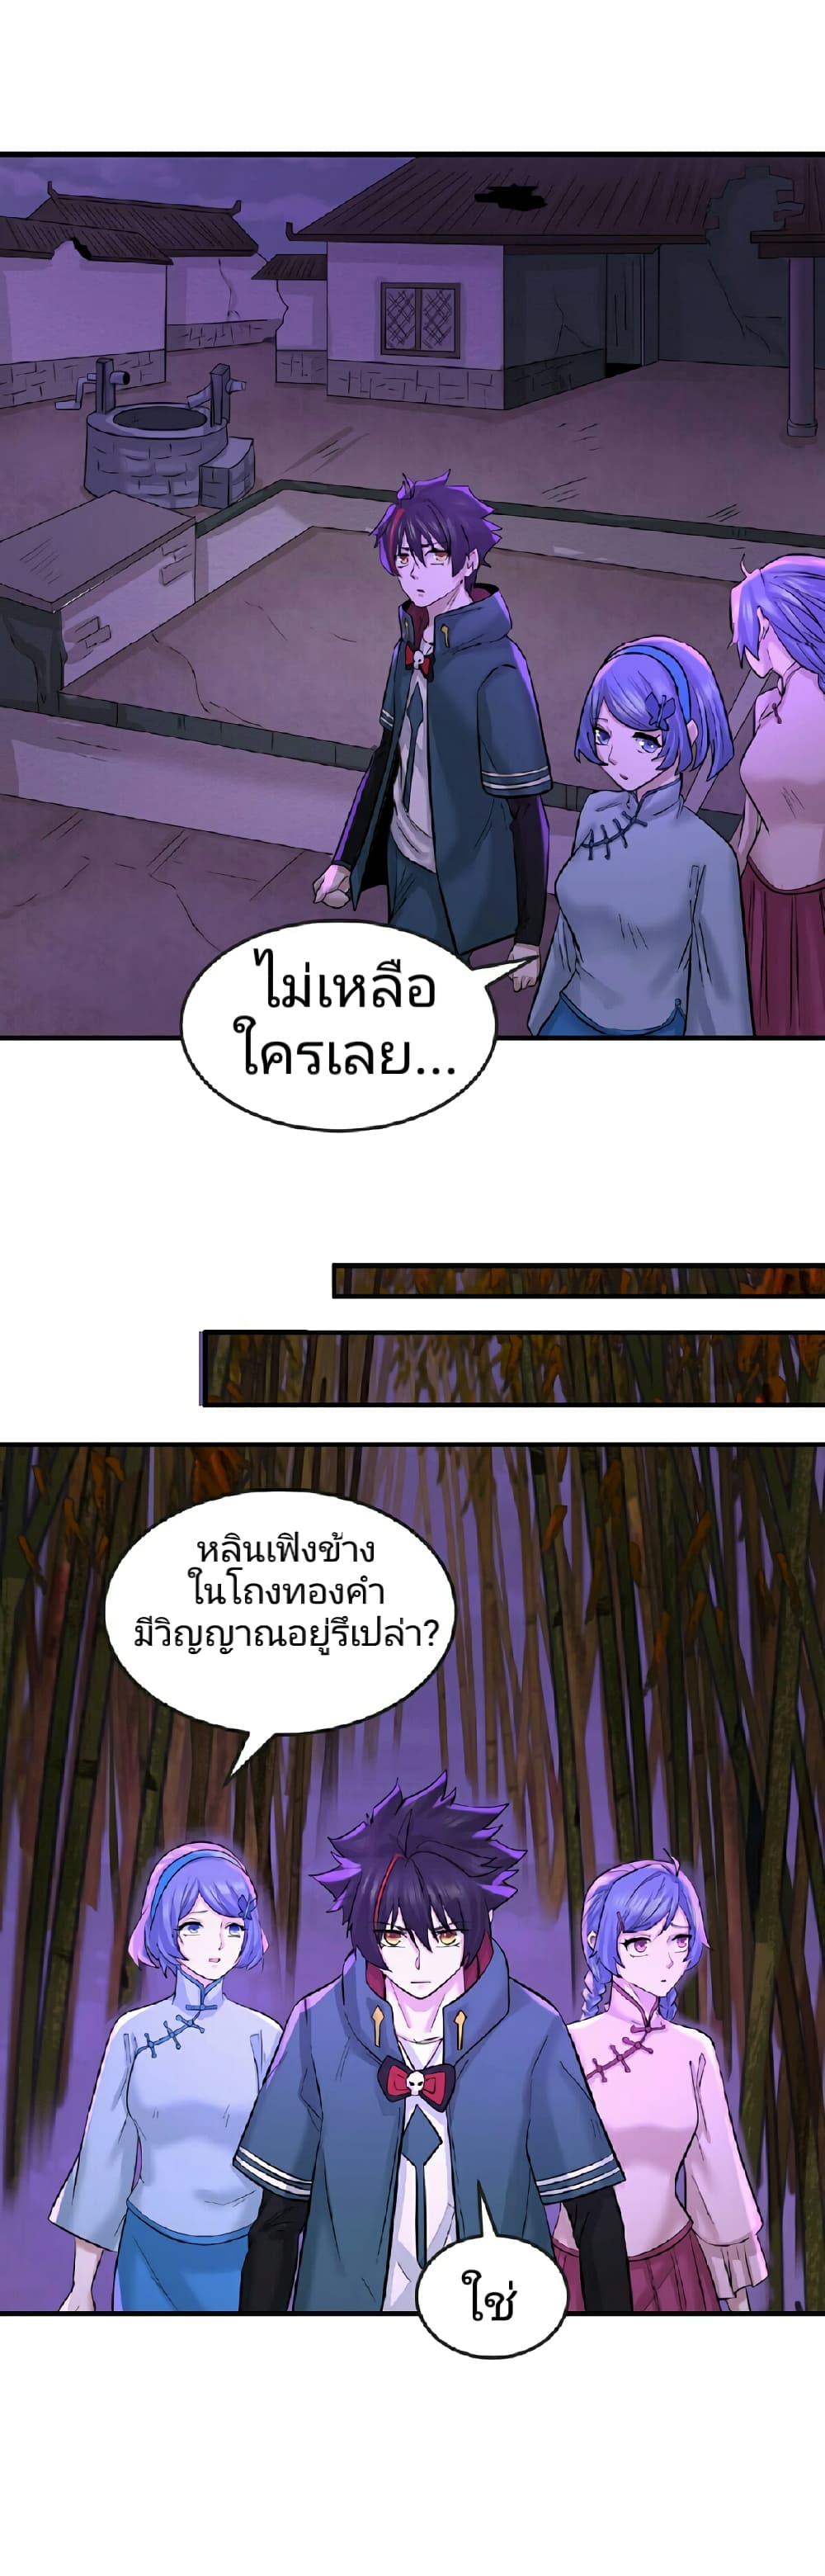 The Age of Ghost Spirits à¸à¸­à¸à¸à¸µà¹ 48 (9)